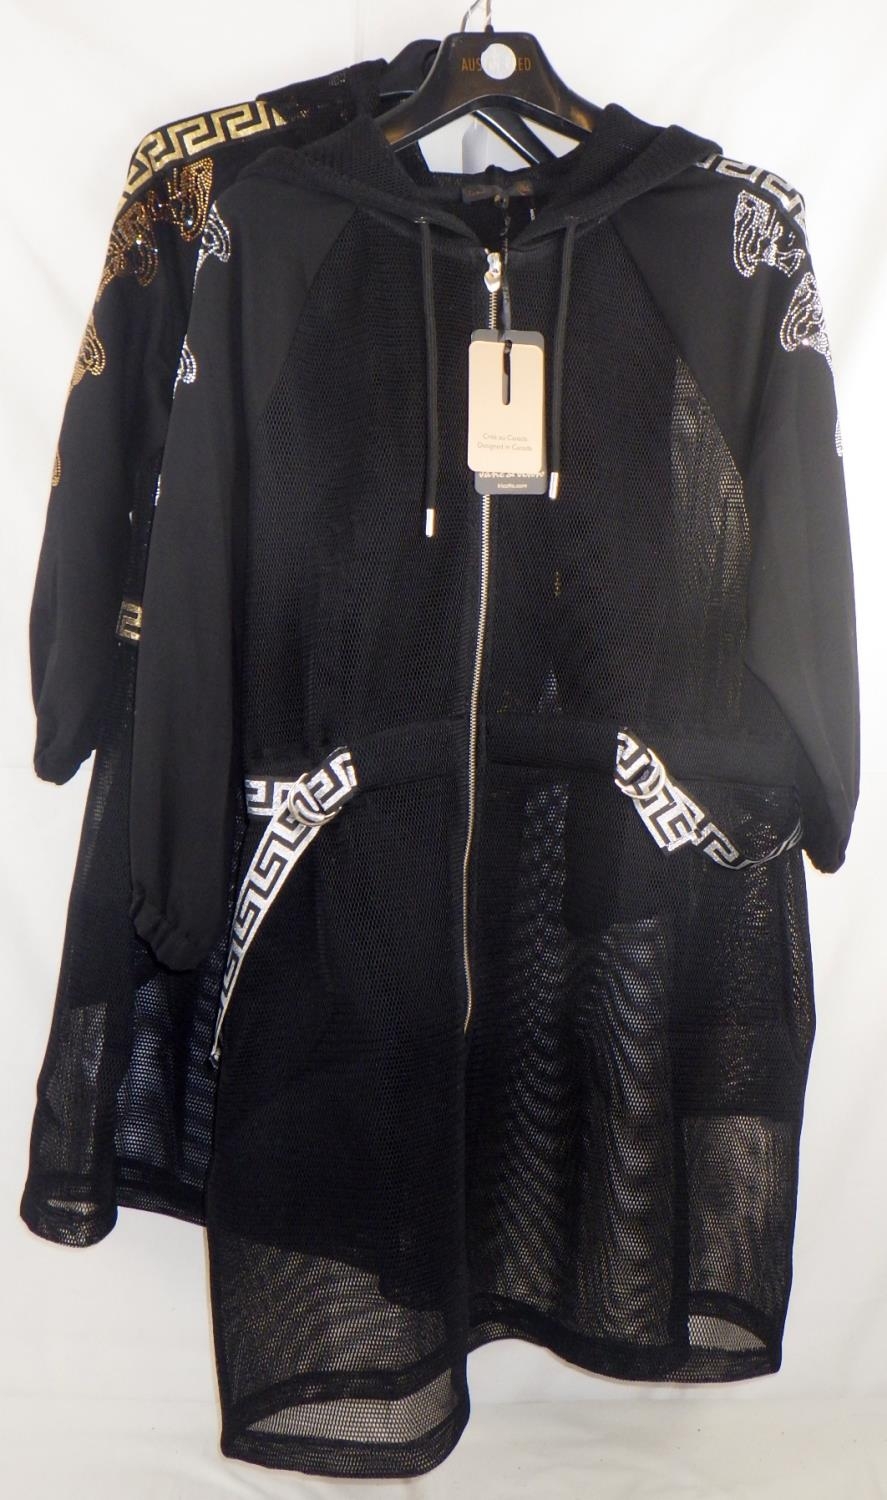 Two Tricotto (Jane & John) black mesh jackets, one with gold trim